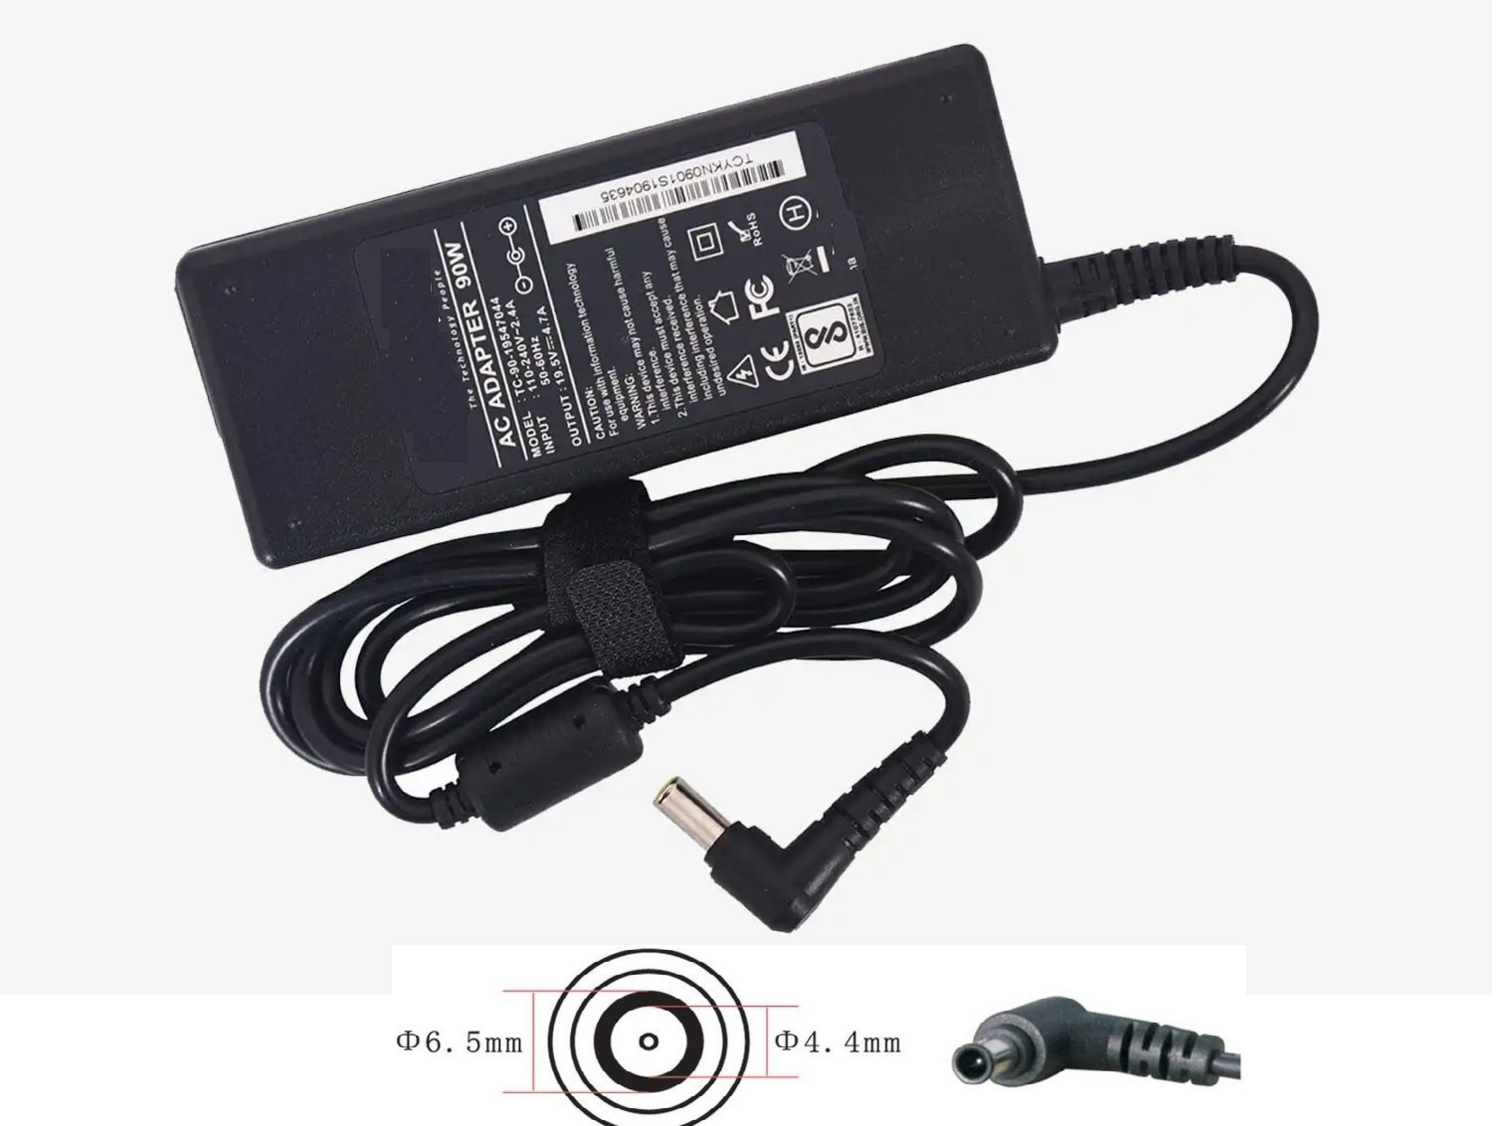 Sony vaio NR series CS series CR series SZ Series Compatible Laptop charger / AC power Adaptor